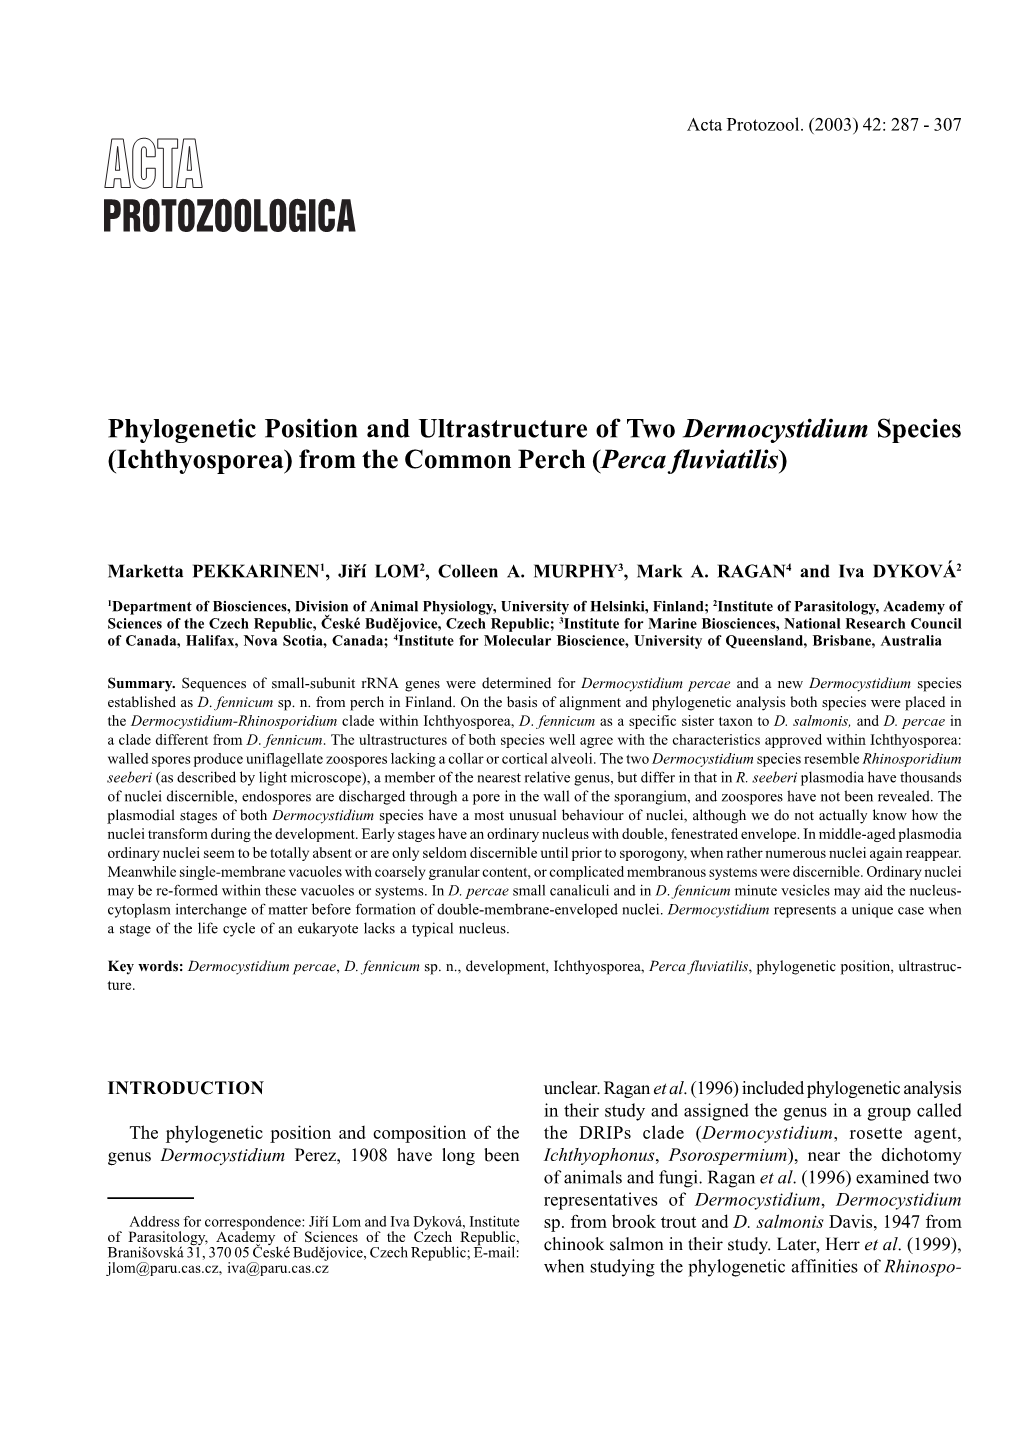 Phylogenetic Position and Ultrastructure of Two Dermocystidium Species (Ichthyosporea) from the Common Perch (Perca Fluviatilis)